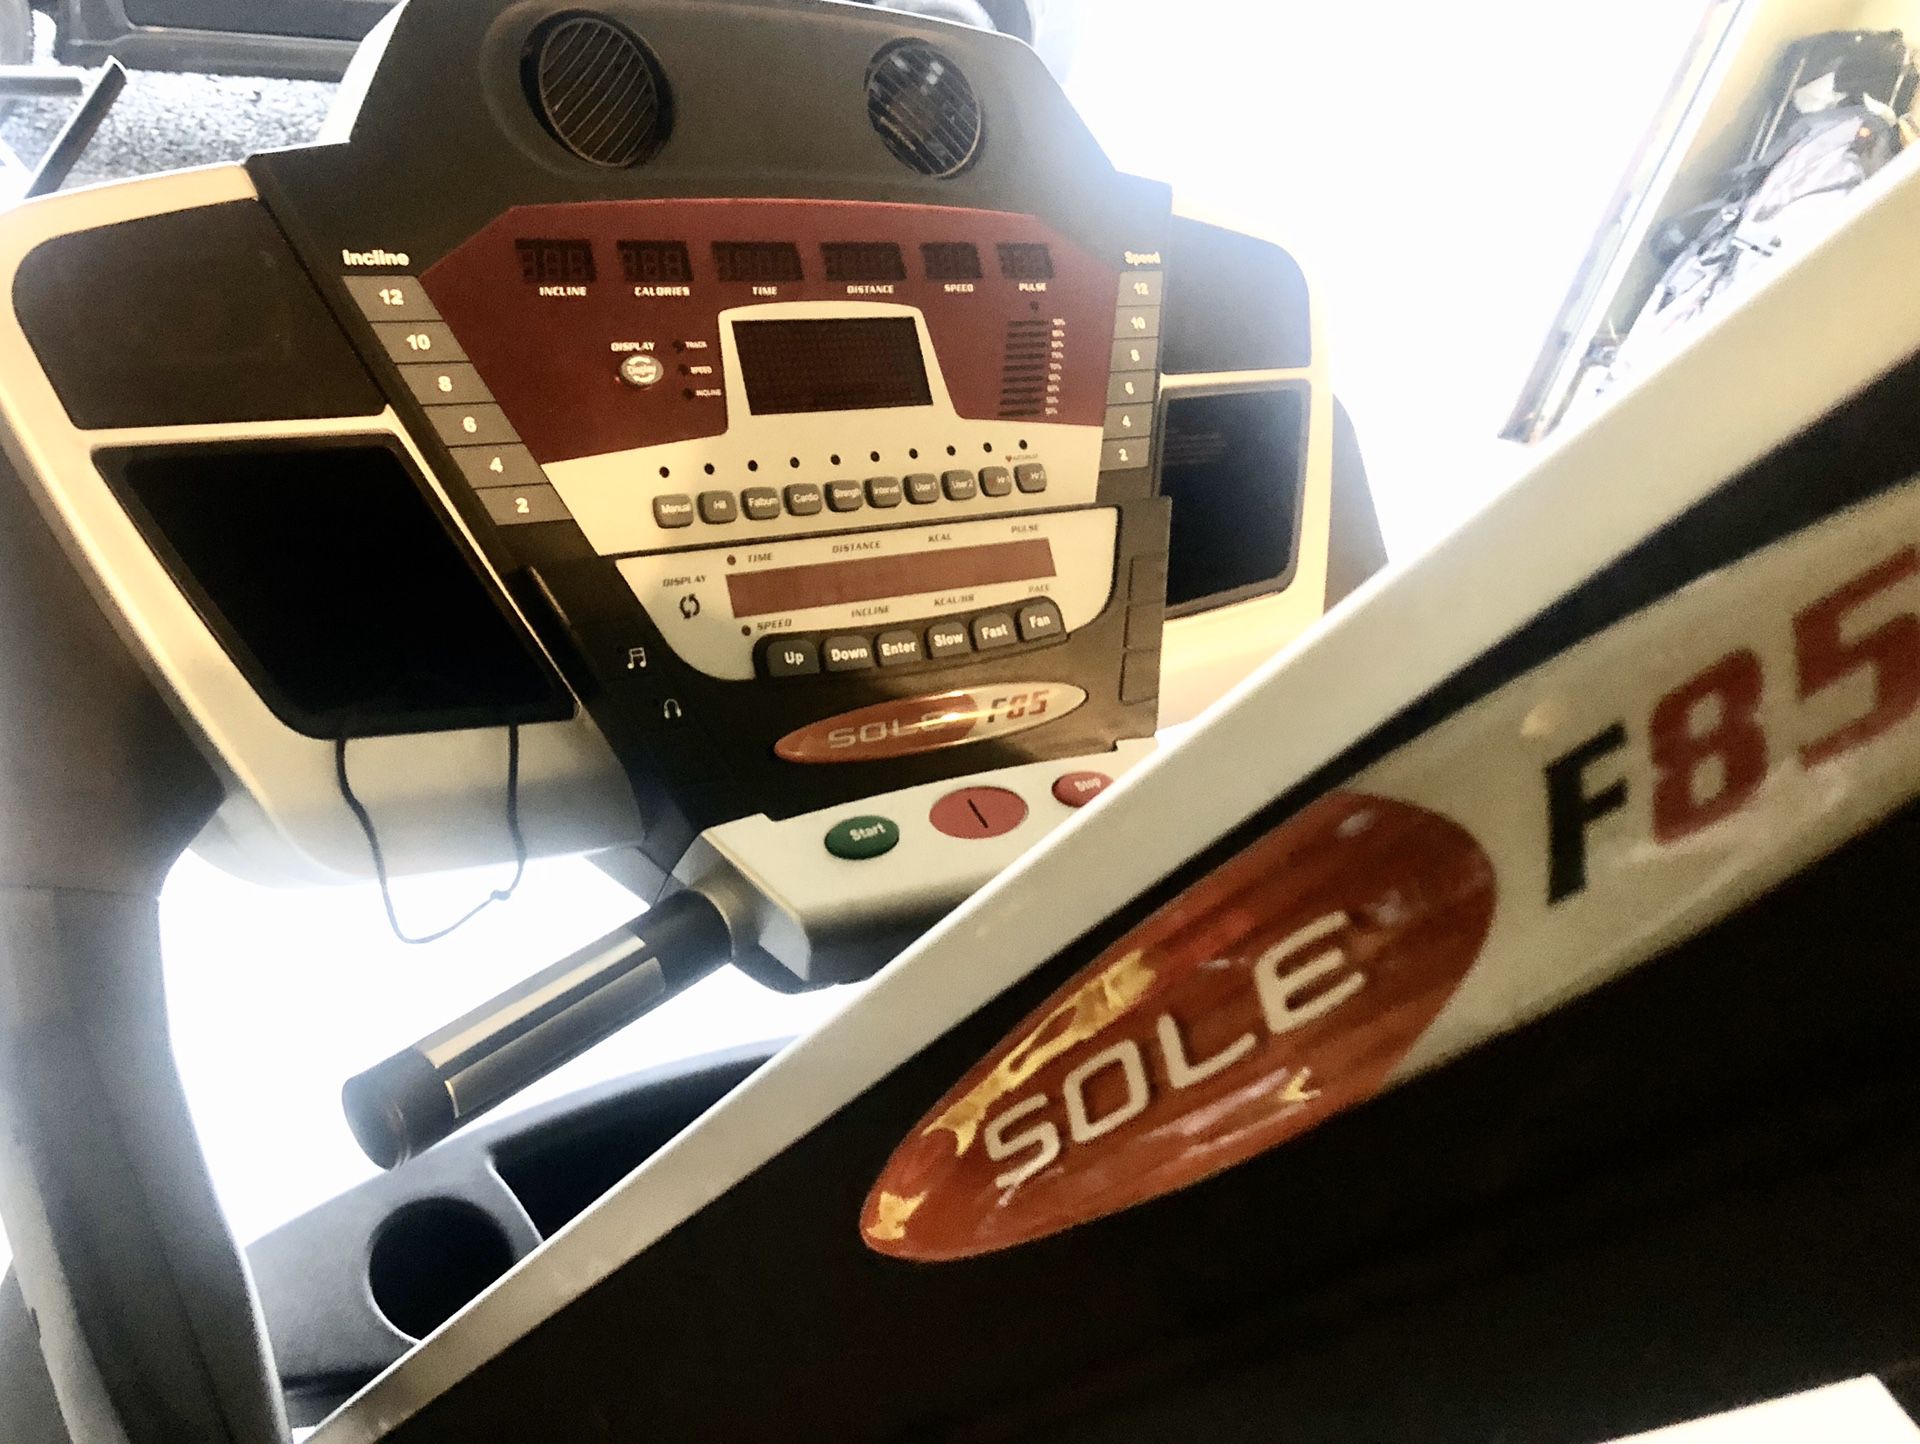 Mint Sole F85, The best price for 2019's best treadmill for runners.